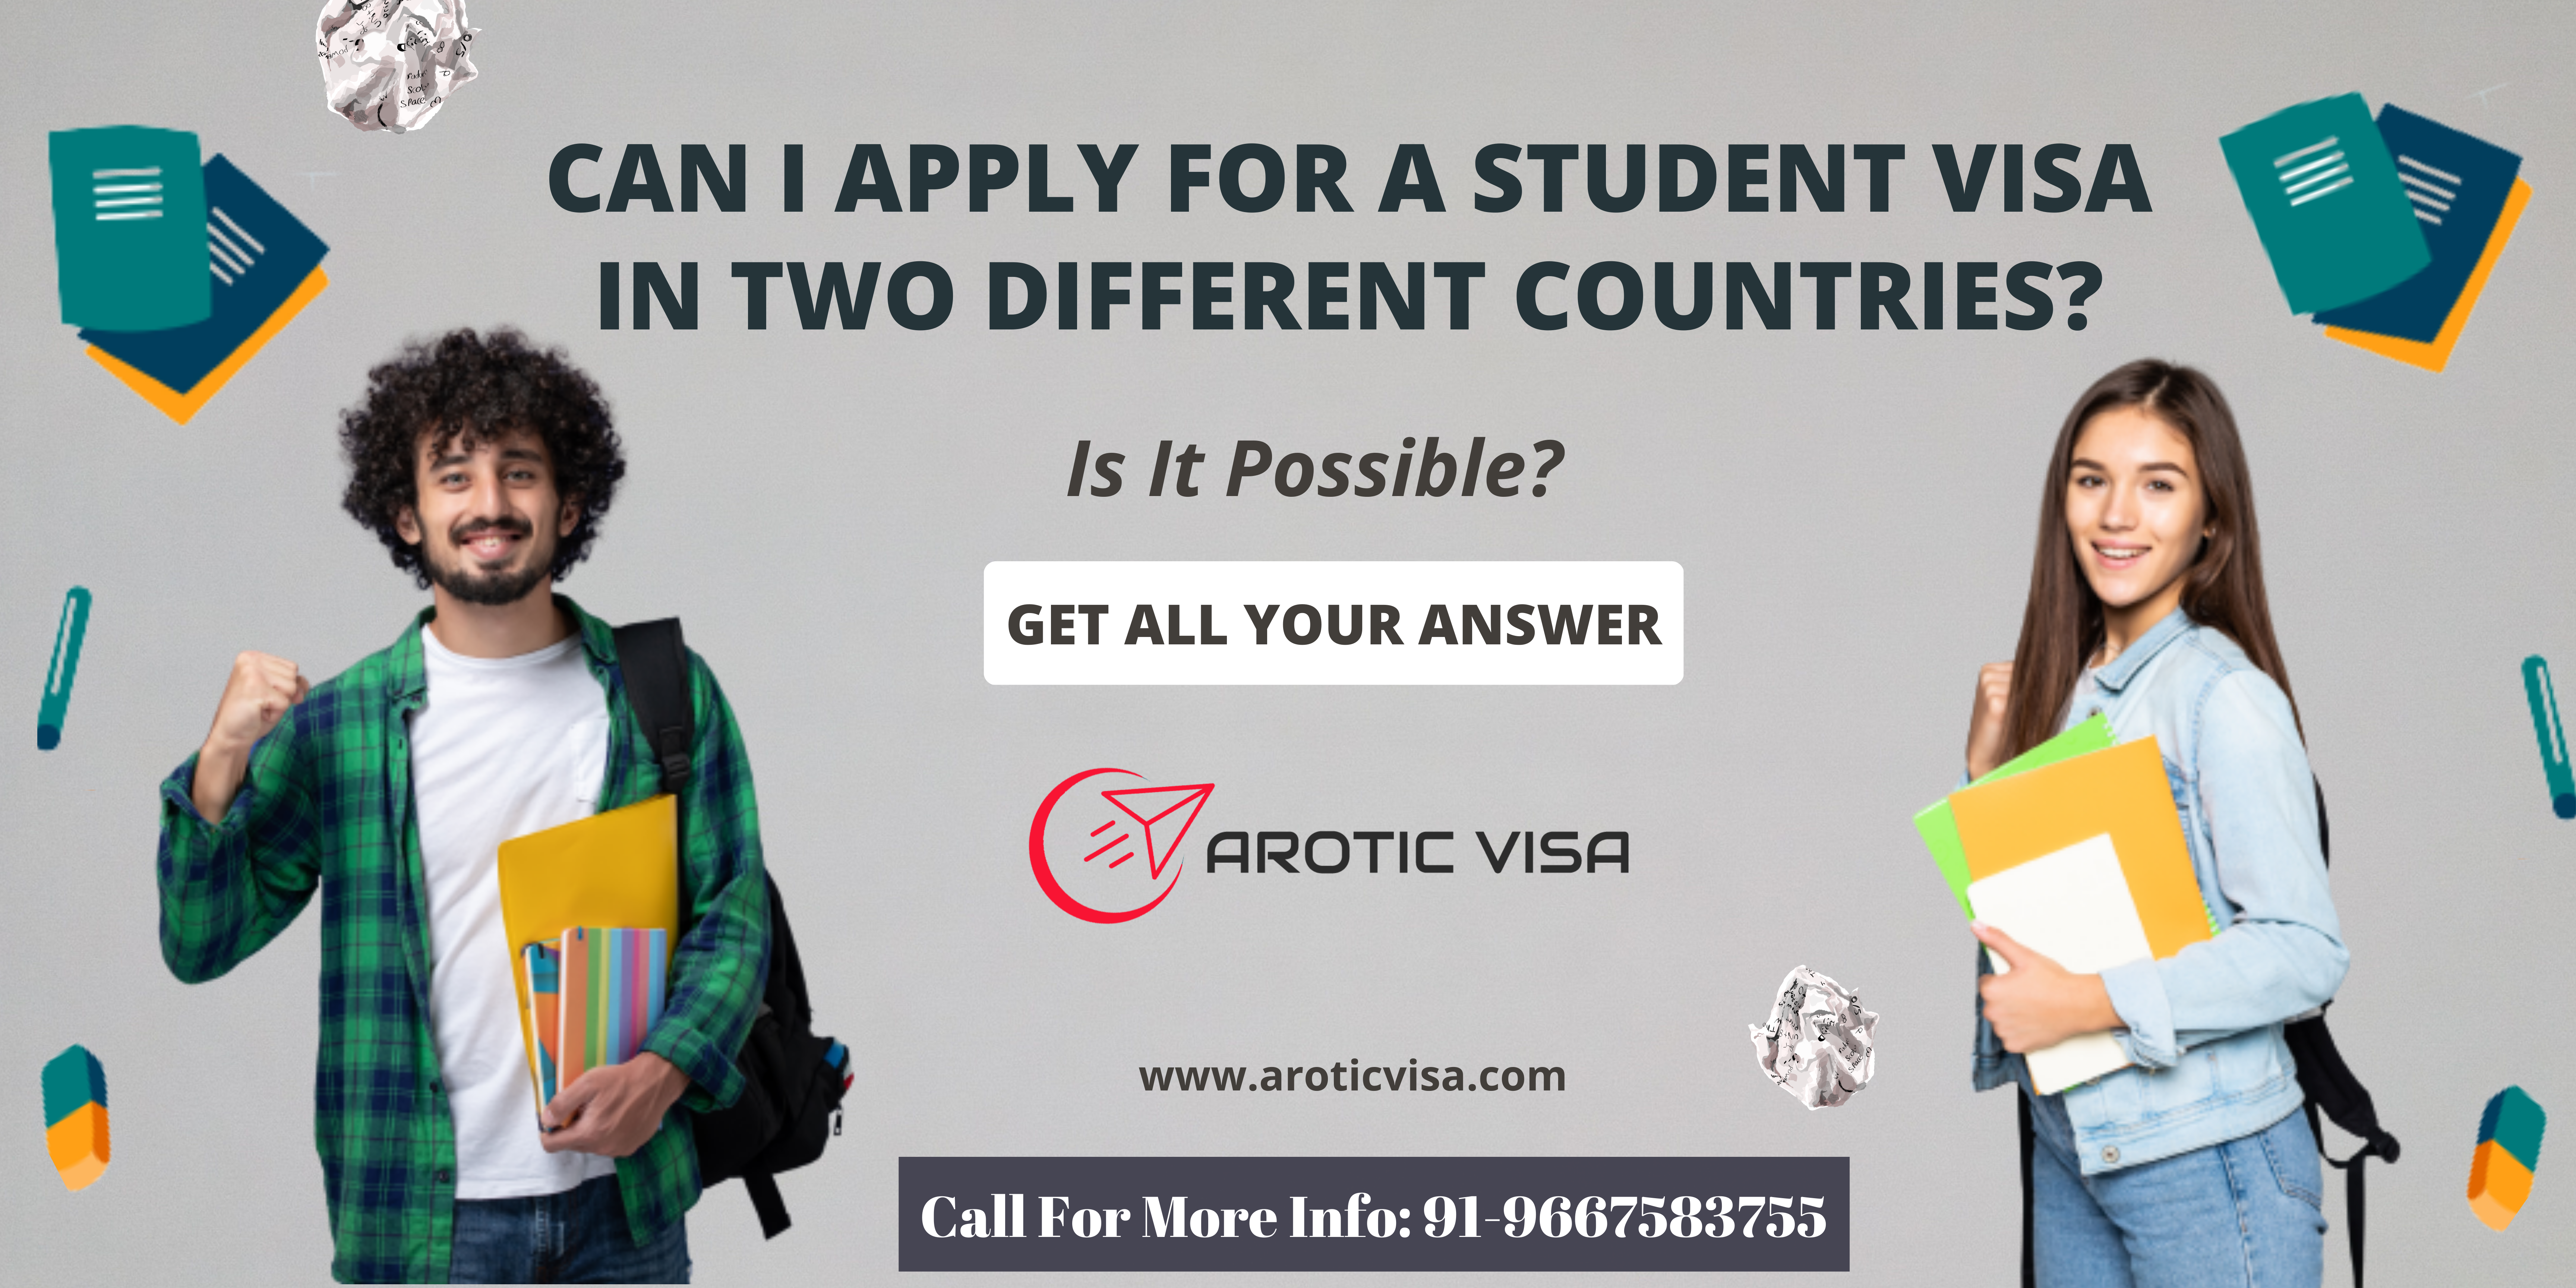 Can I apply for a student visa in two different countries?